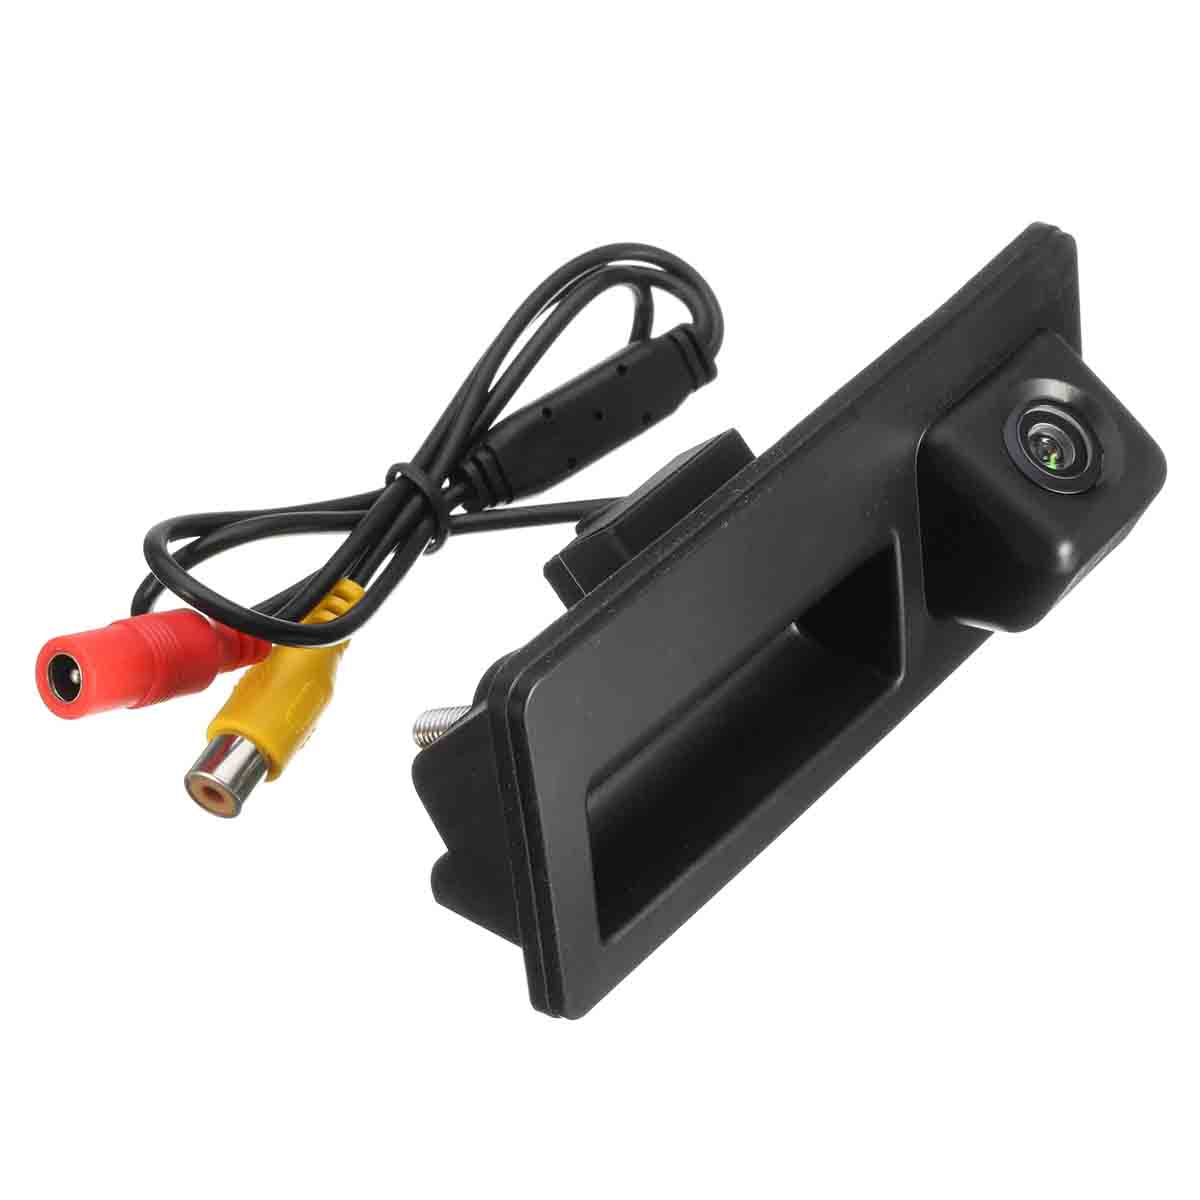 Car-Trunk-Handle-CCD-Rear-View-Backup-Parking-Camera-For-Audi-1159325